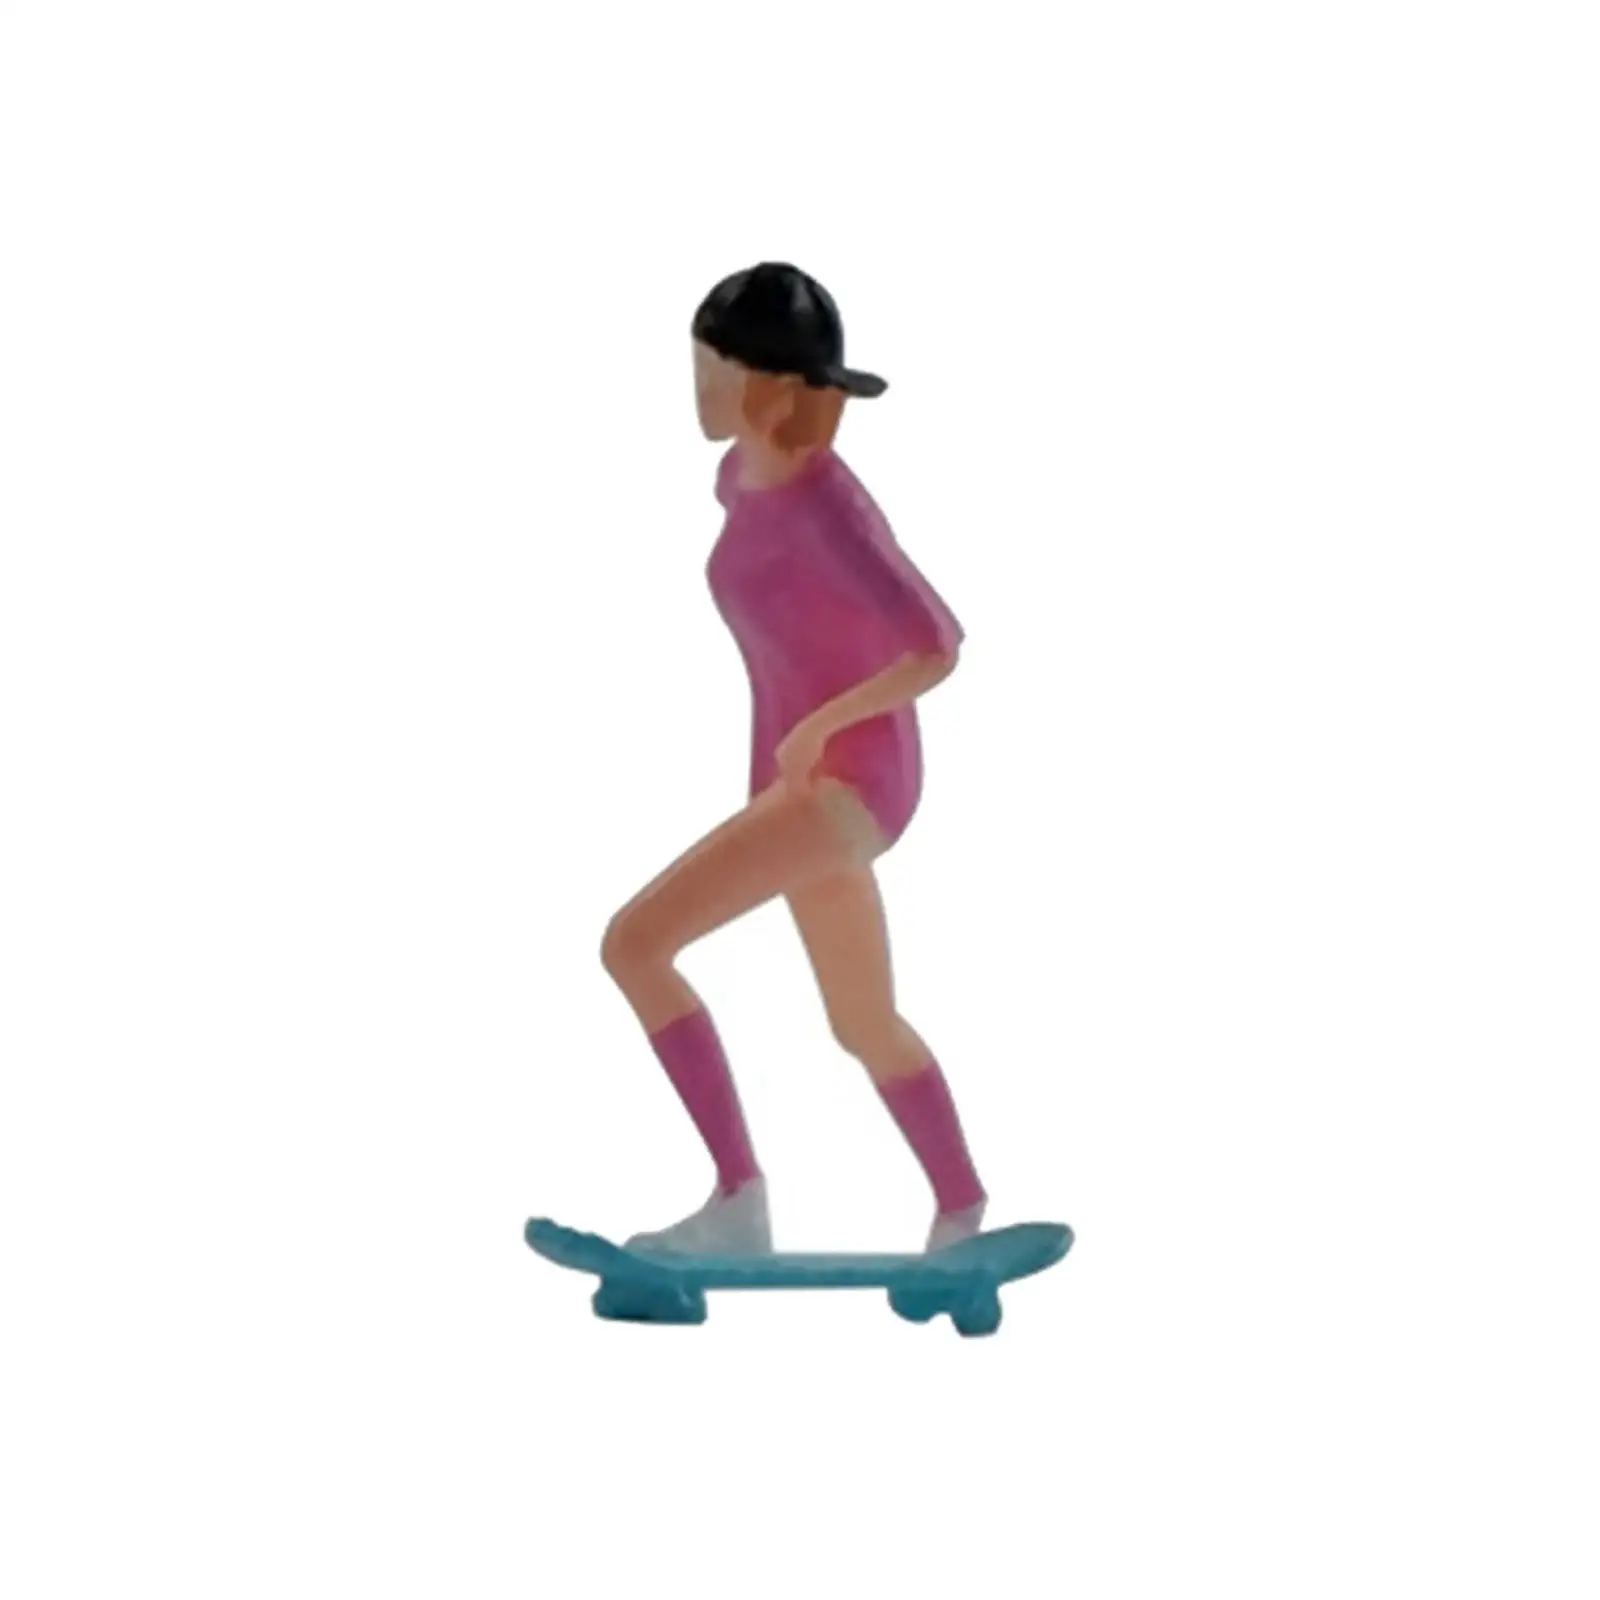 Resin 1/64 Diorama Figures Model Skateboard Girl Miniature Tiny People for Dioramas Sand Table DIY Projects Layout Ornament